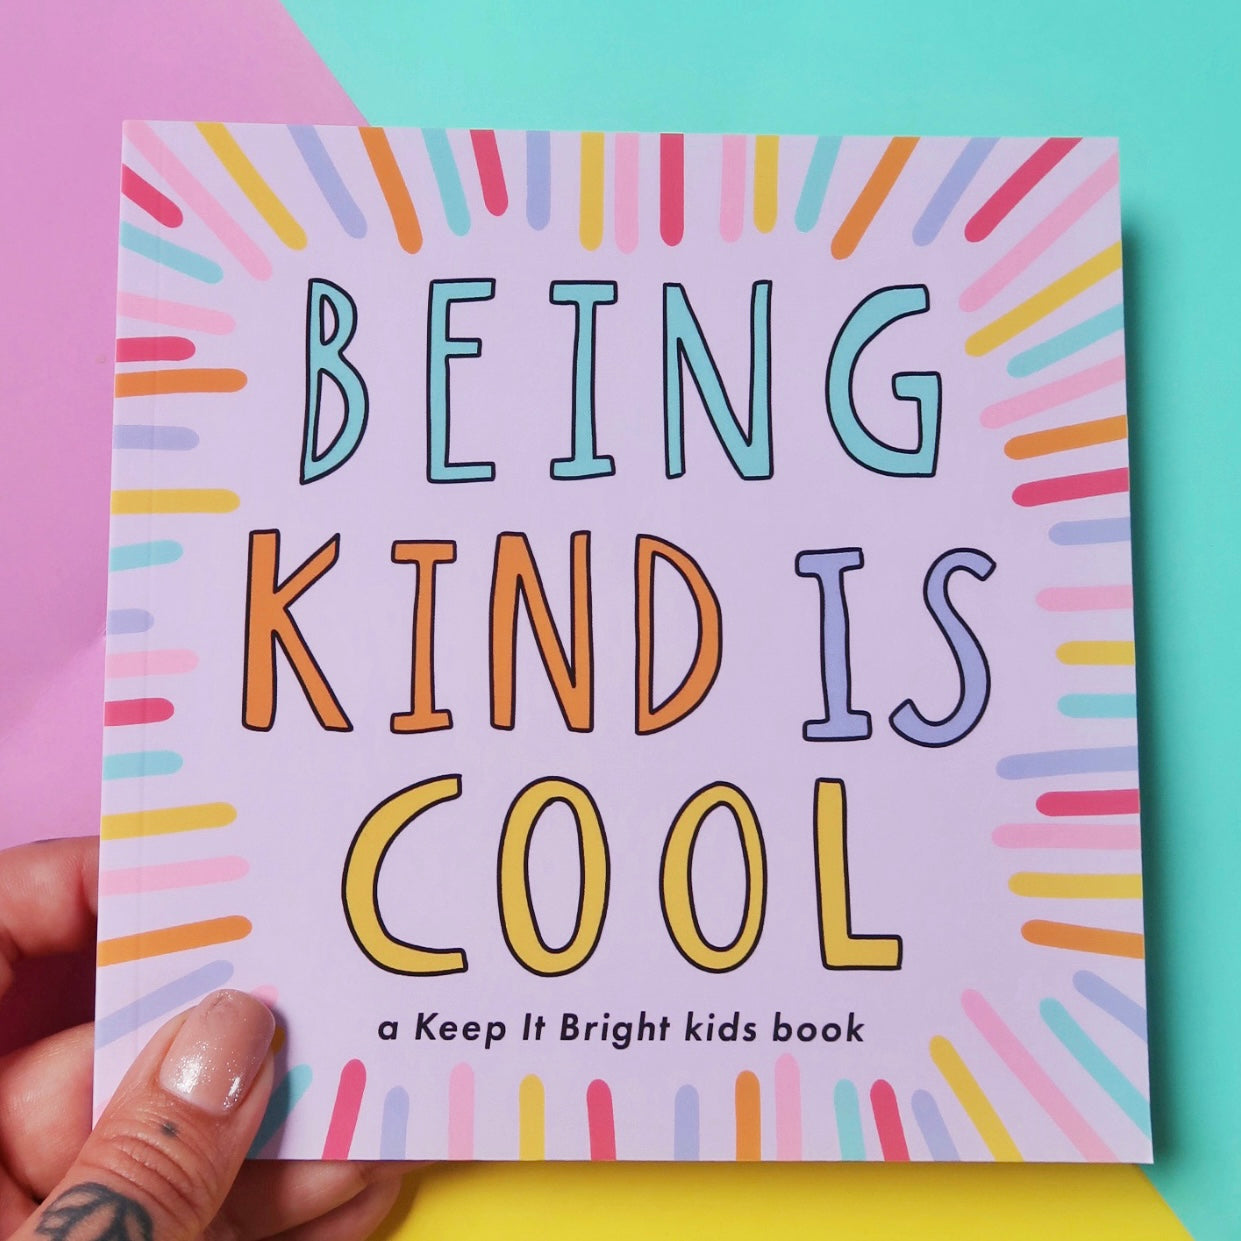 Being Kind Is Cool - a keep it bright kids book about kindness front cover Being Kind Is Cool kids book - a book about kindness - bundle